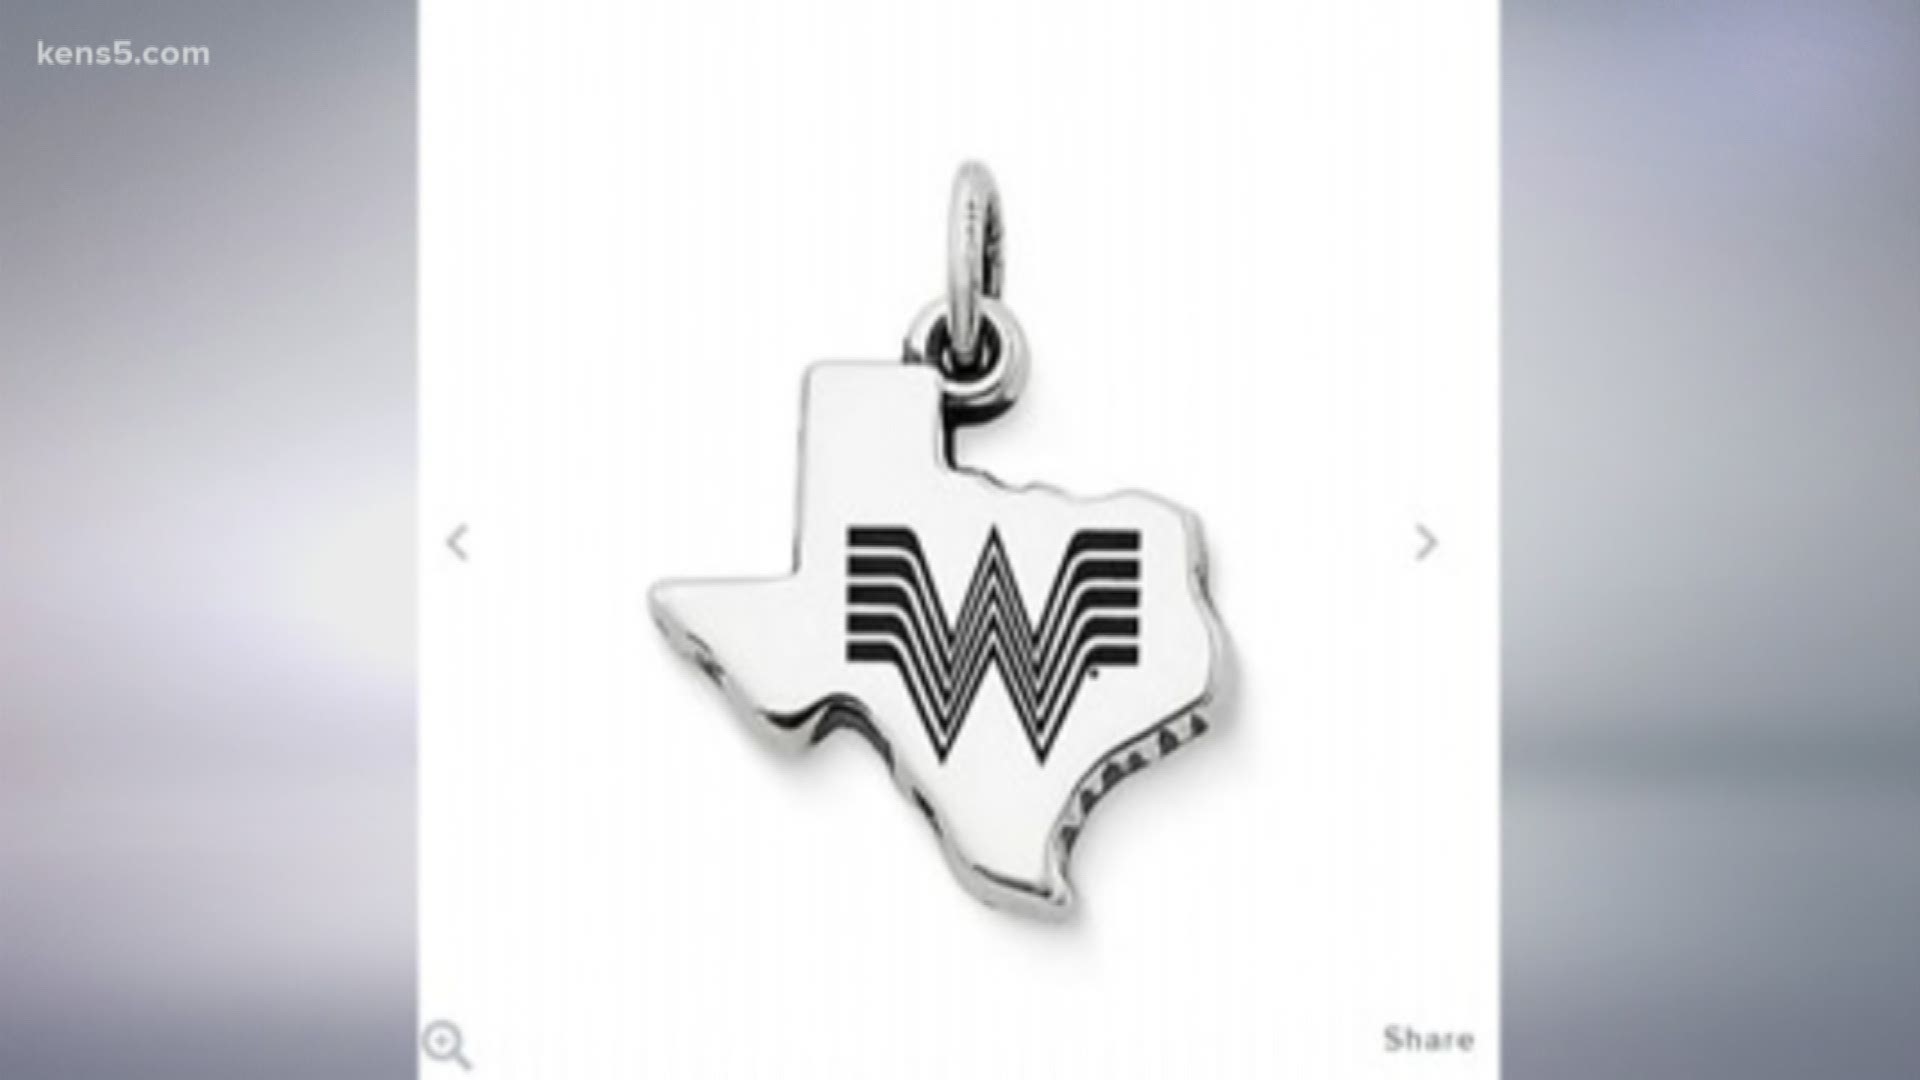 Does it get any more Texas than a James Avery charm with a Whataburger logo?